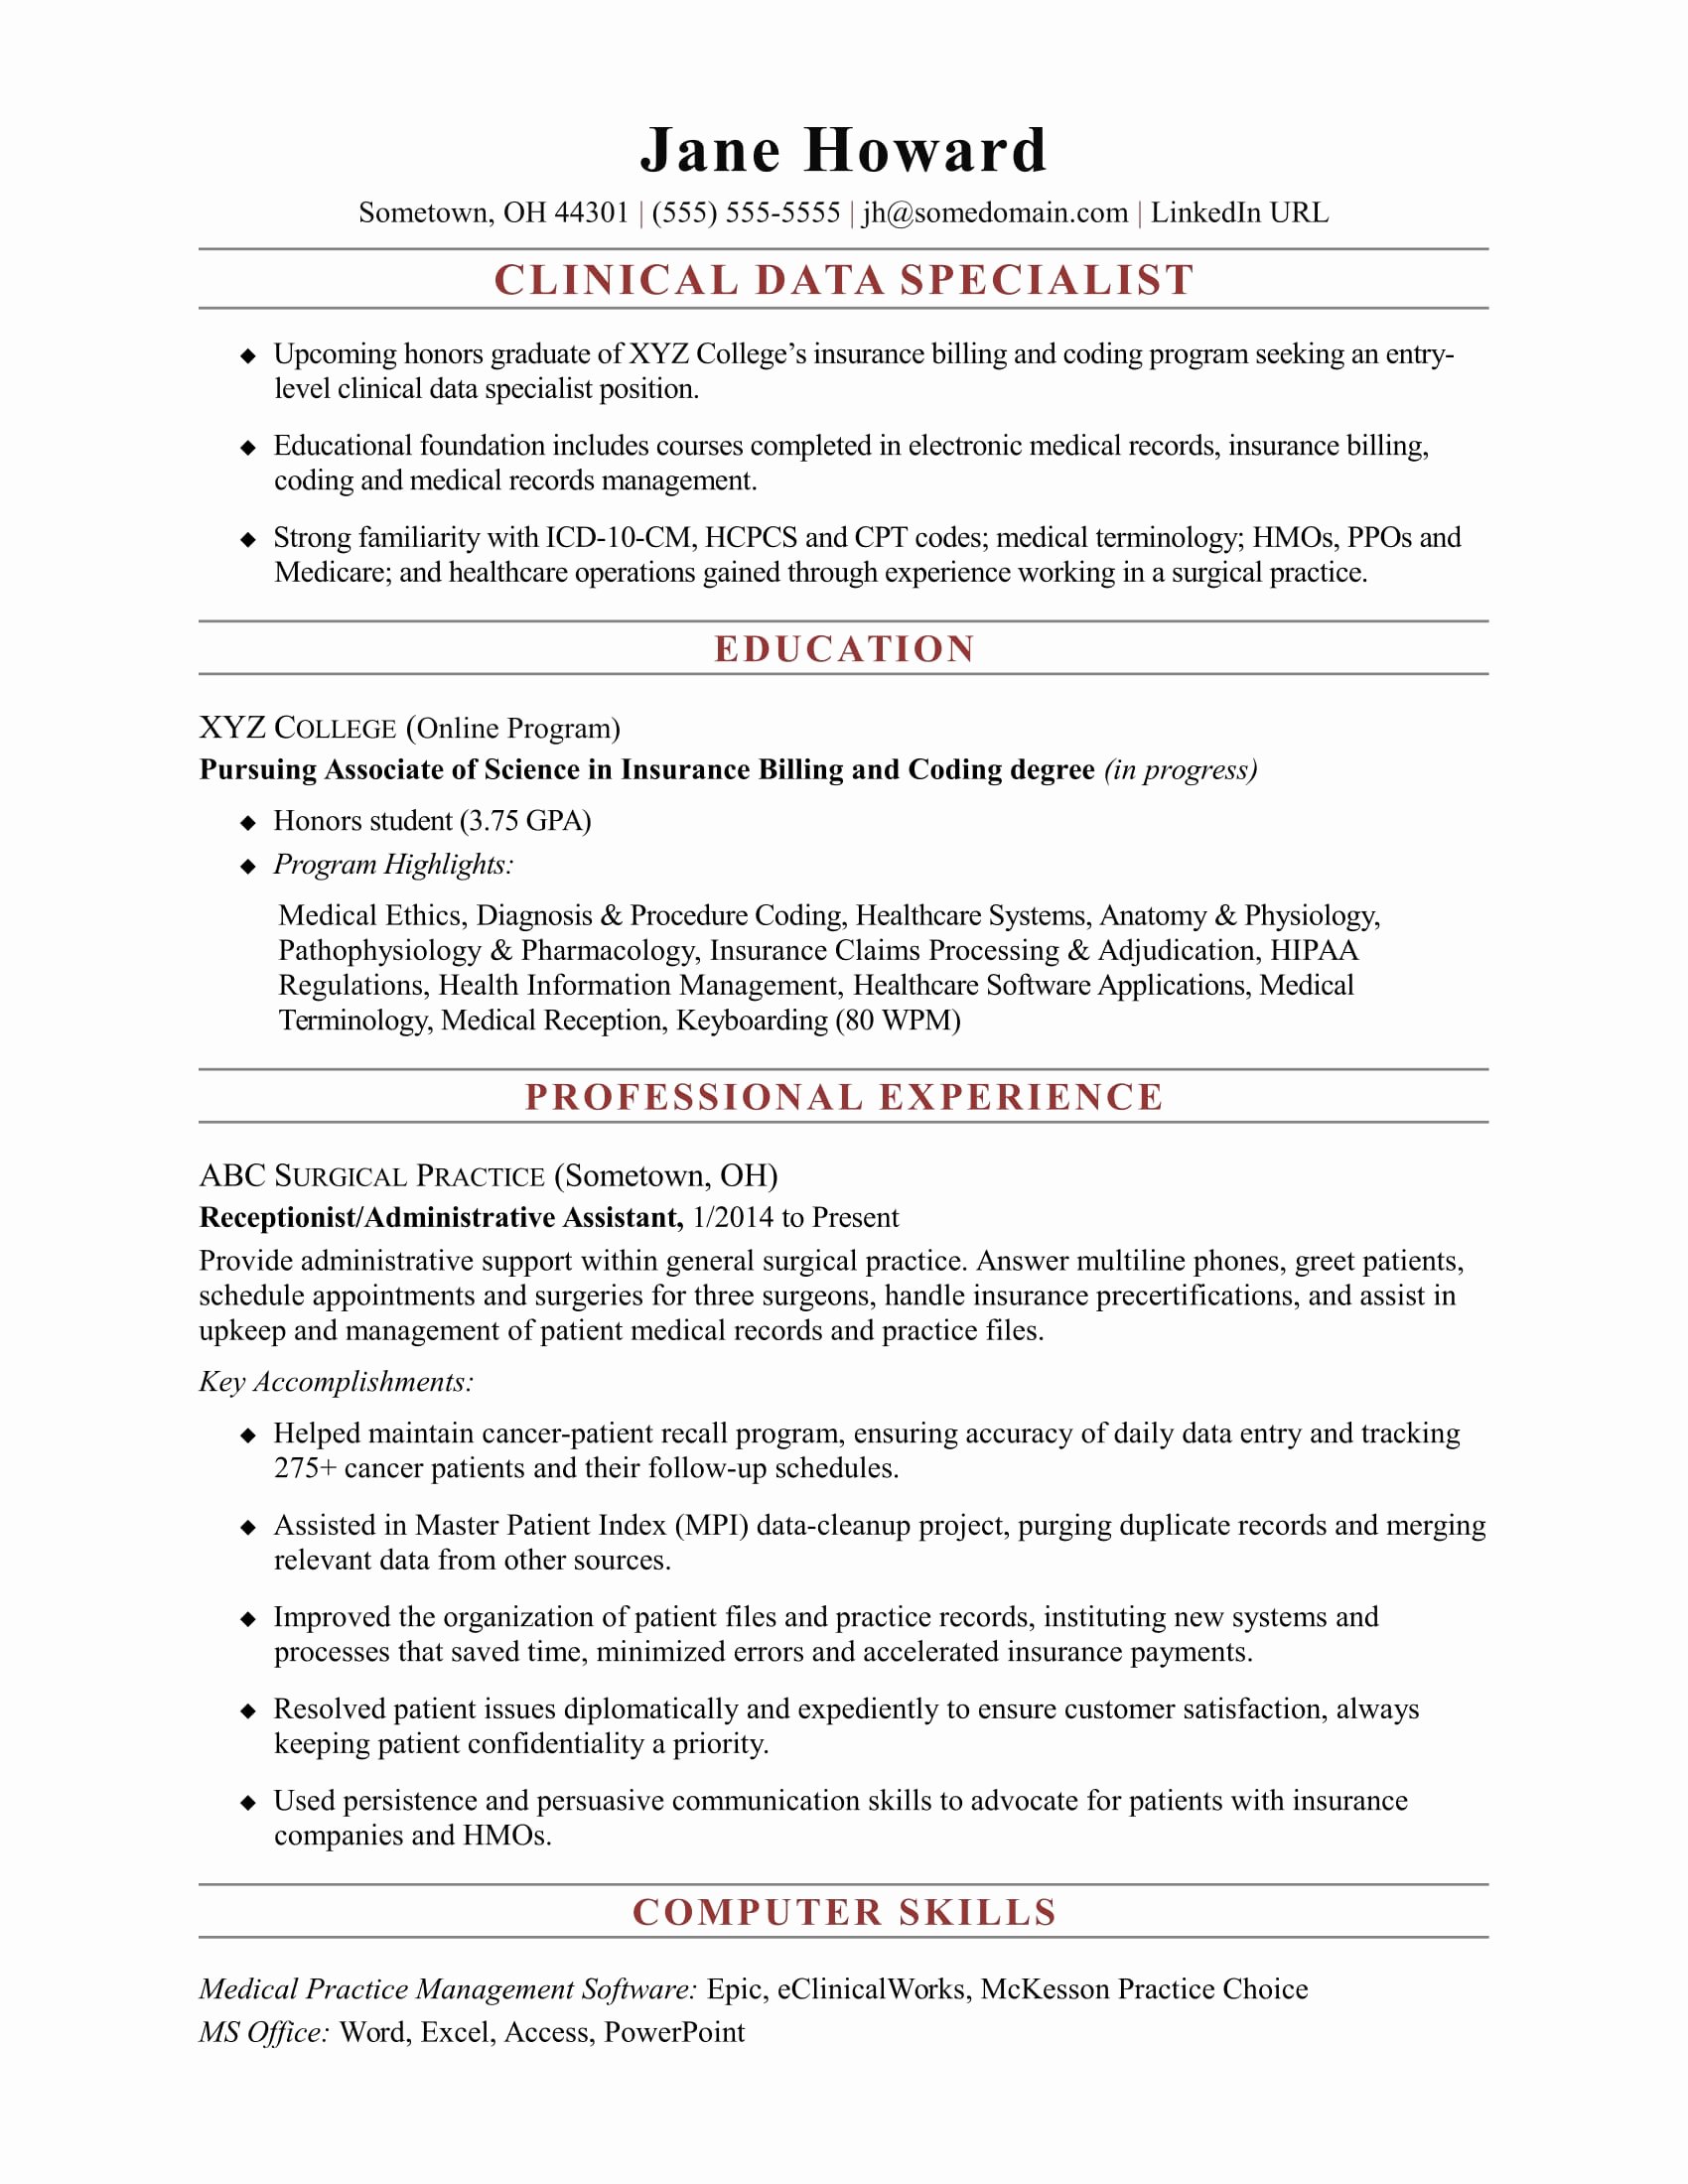 Entry Level Clinical Data Specialist Resume Sample